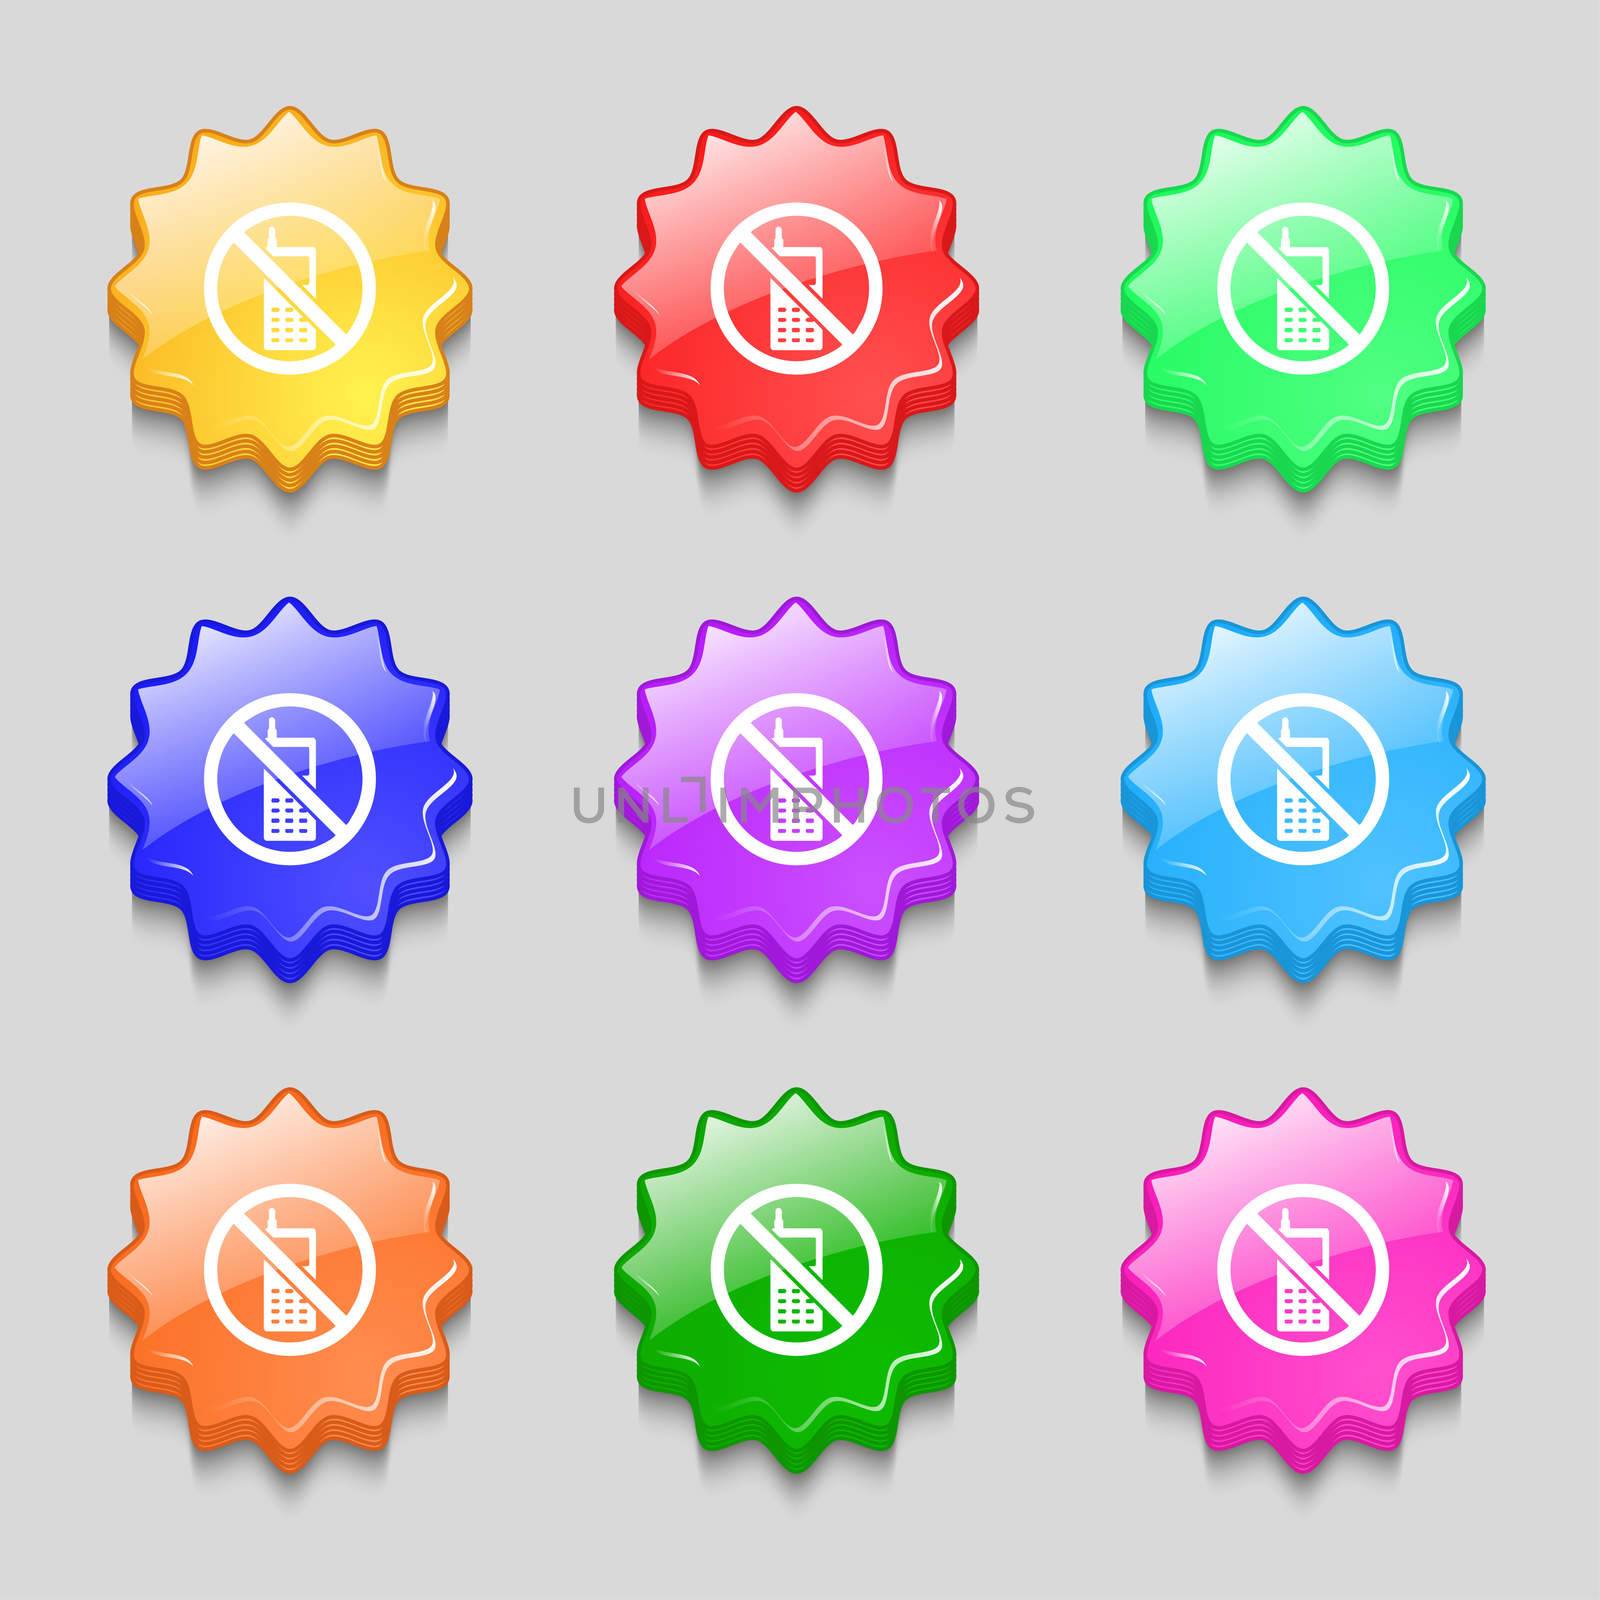 mobile phone is prohibited icon sign. symbol on nine wavy colourful buttons. illustration